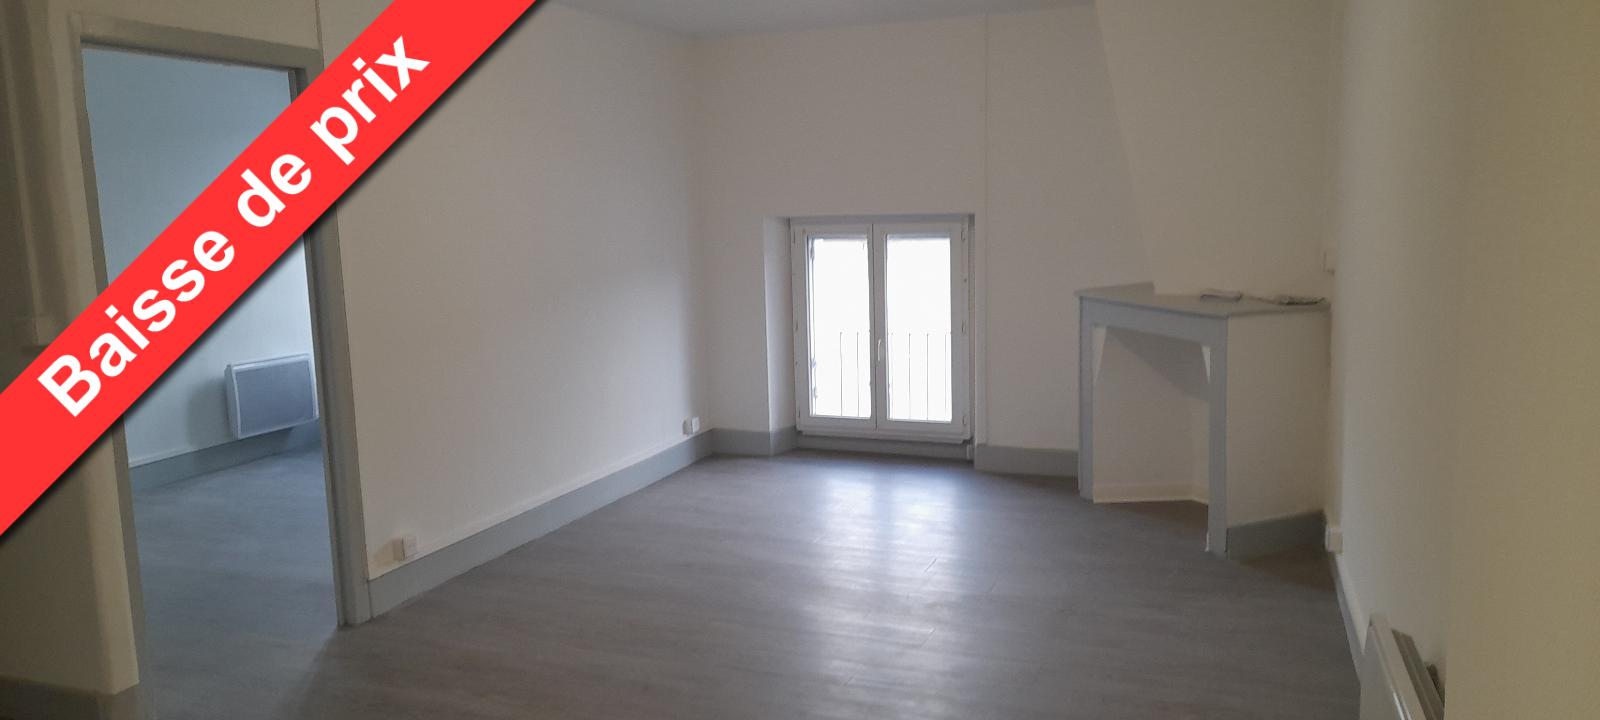 Appartement 3 pièces - 48m² - ST GIRONS